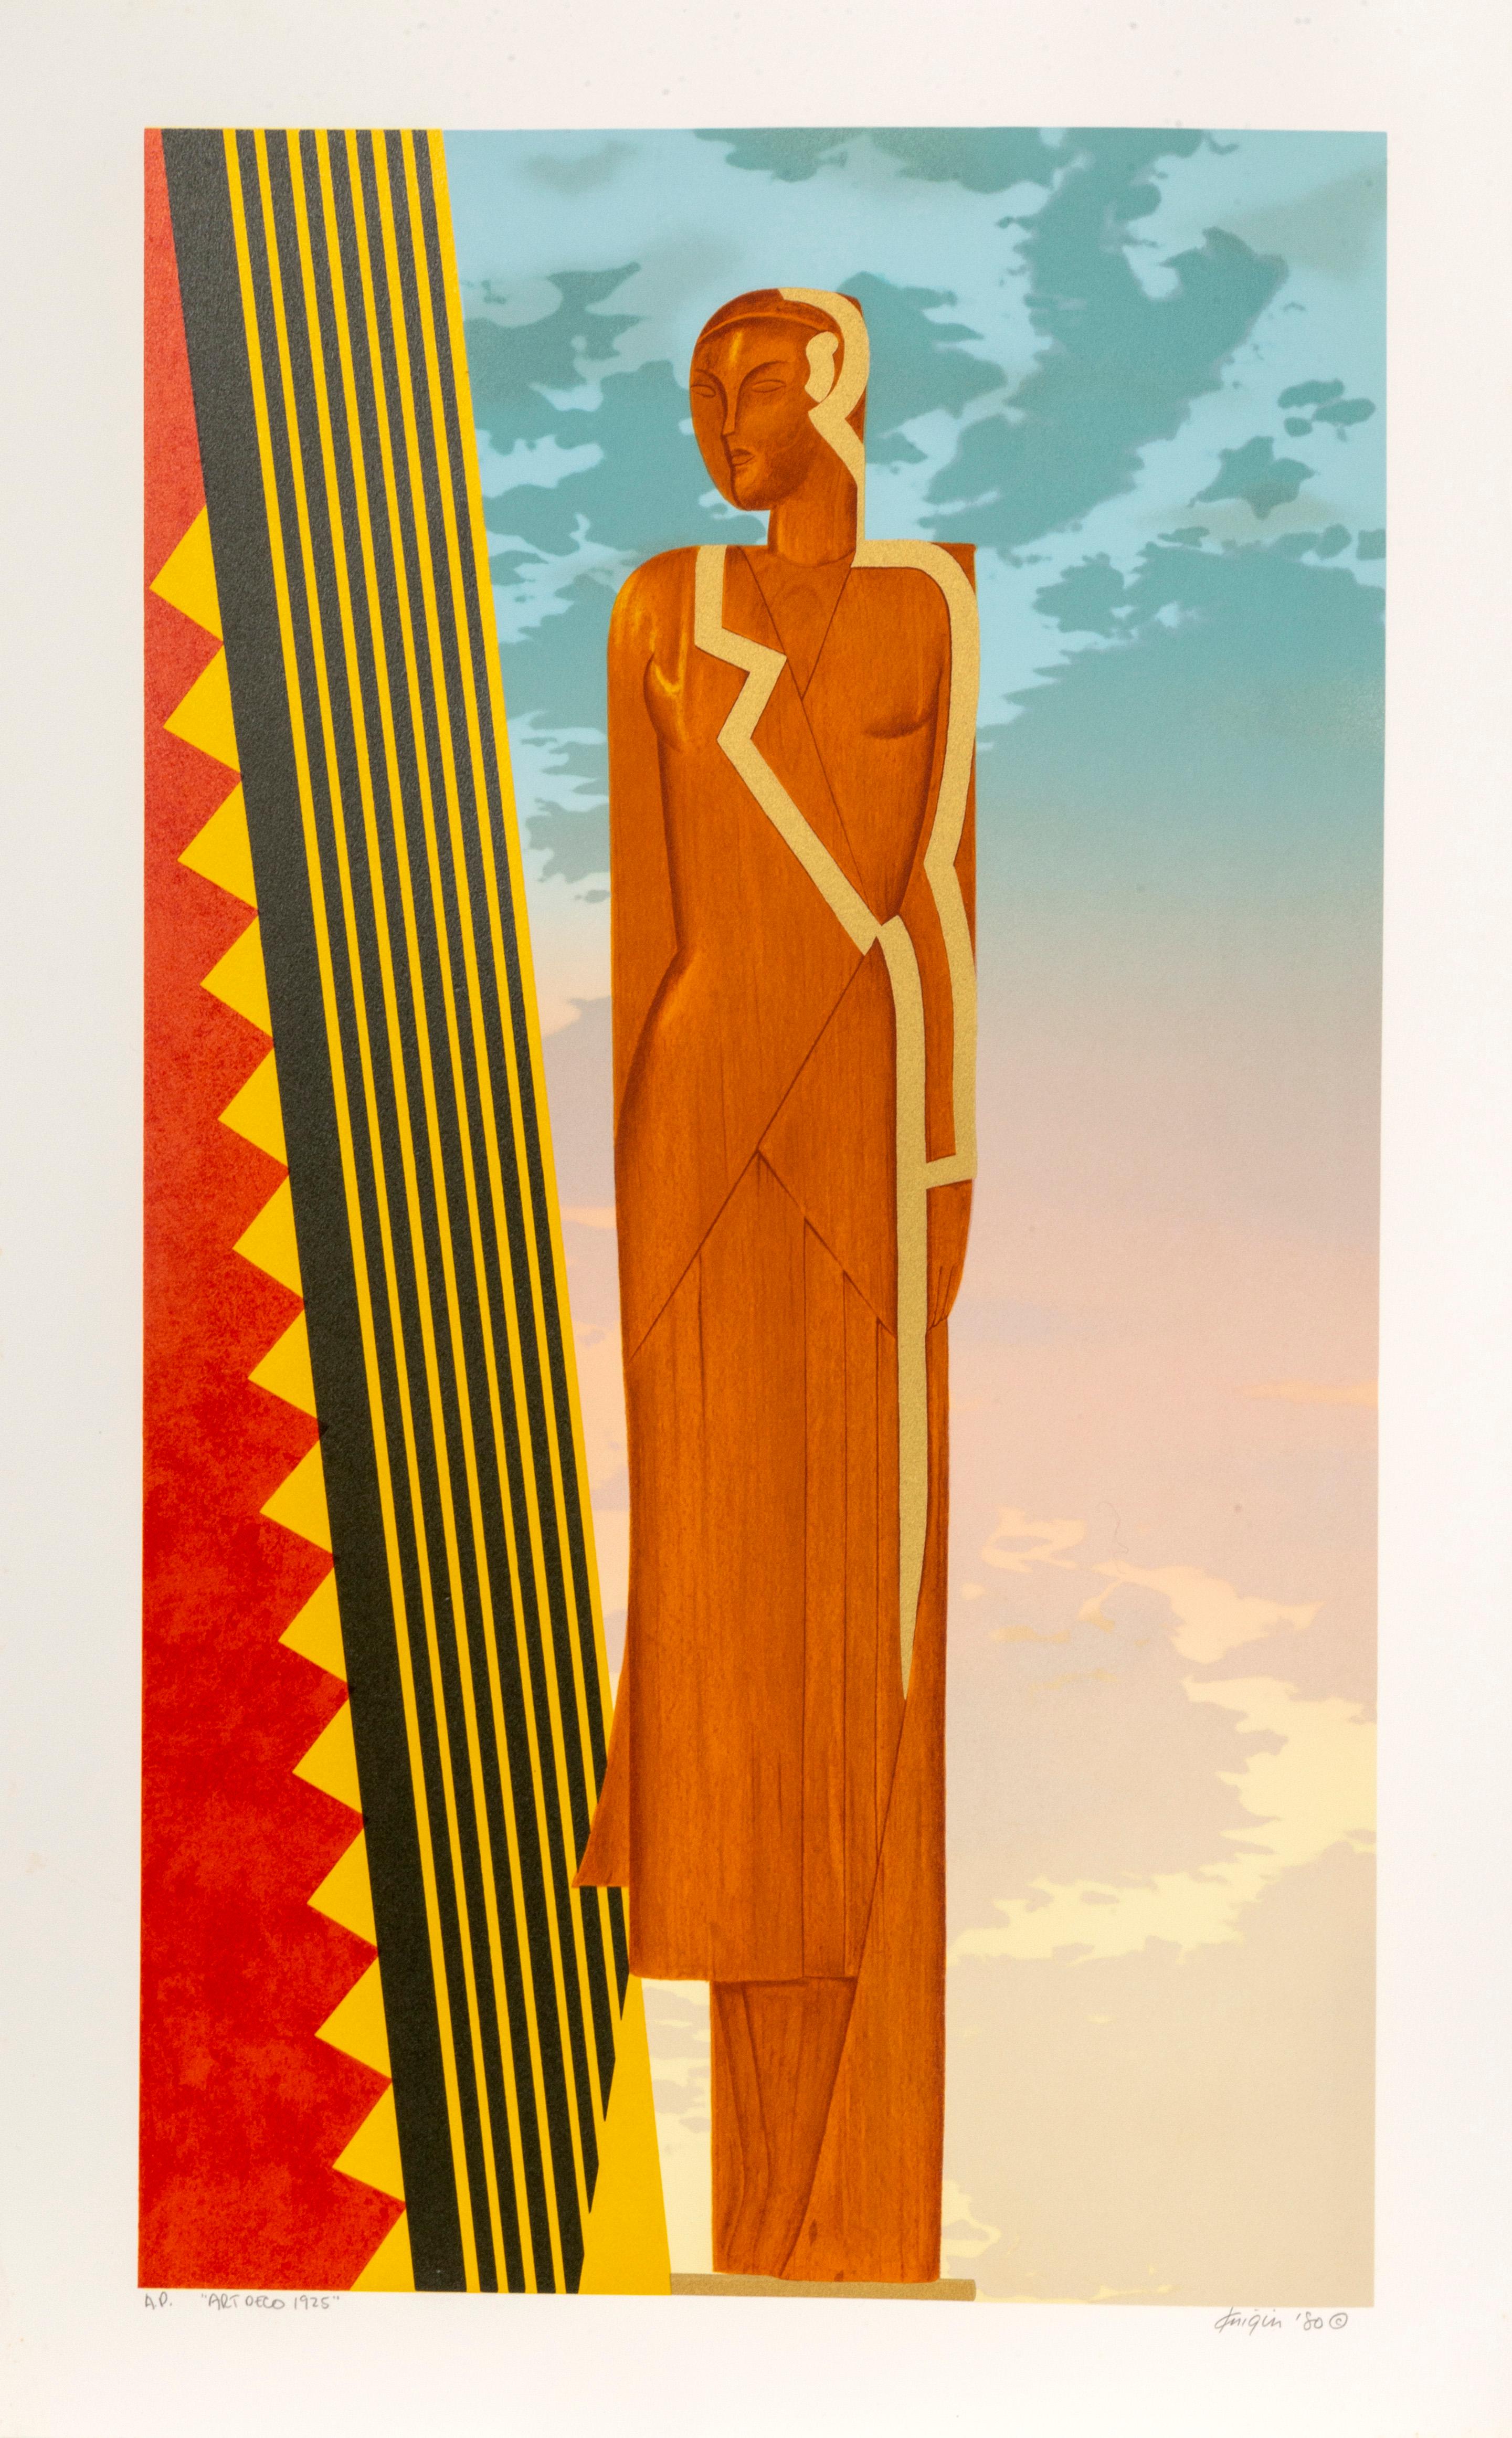 Artist: Michael Knigin, American (1942 - 2011)
Title: Art Deco 1925
Year: 1980
Medium: Screenprint, signed and numbered in pencil
Edition: AP
Size: 33.5 x 21 in. (85.09 x 53.34 cm)